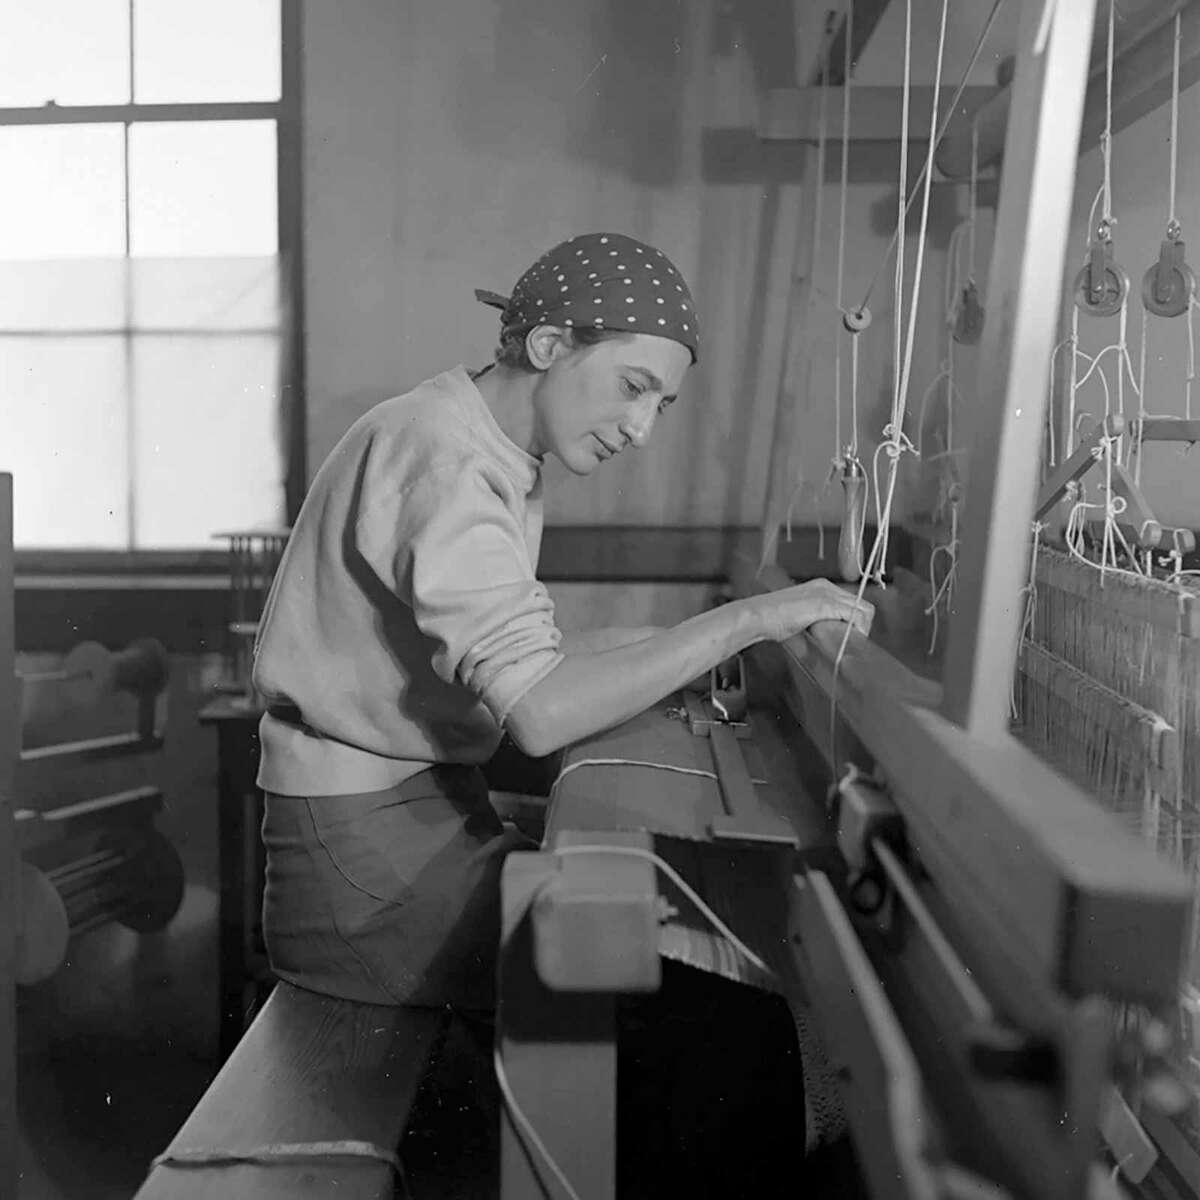 Anni Albers at Black Mountain College at midcentury.